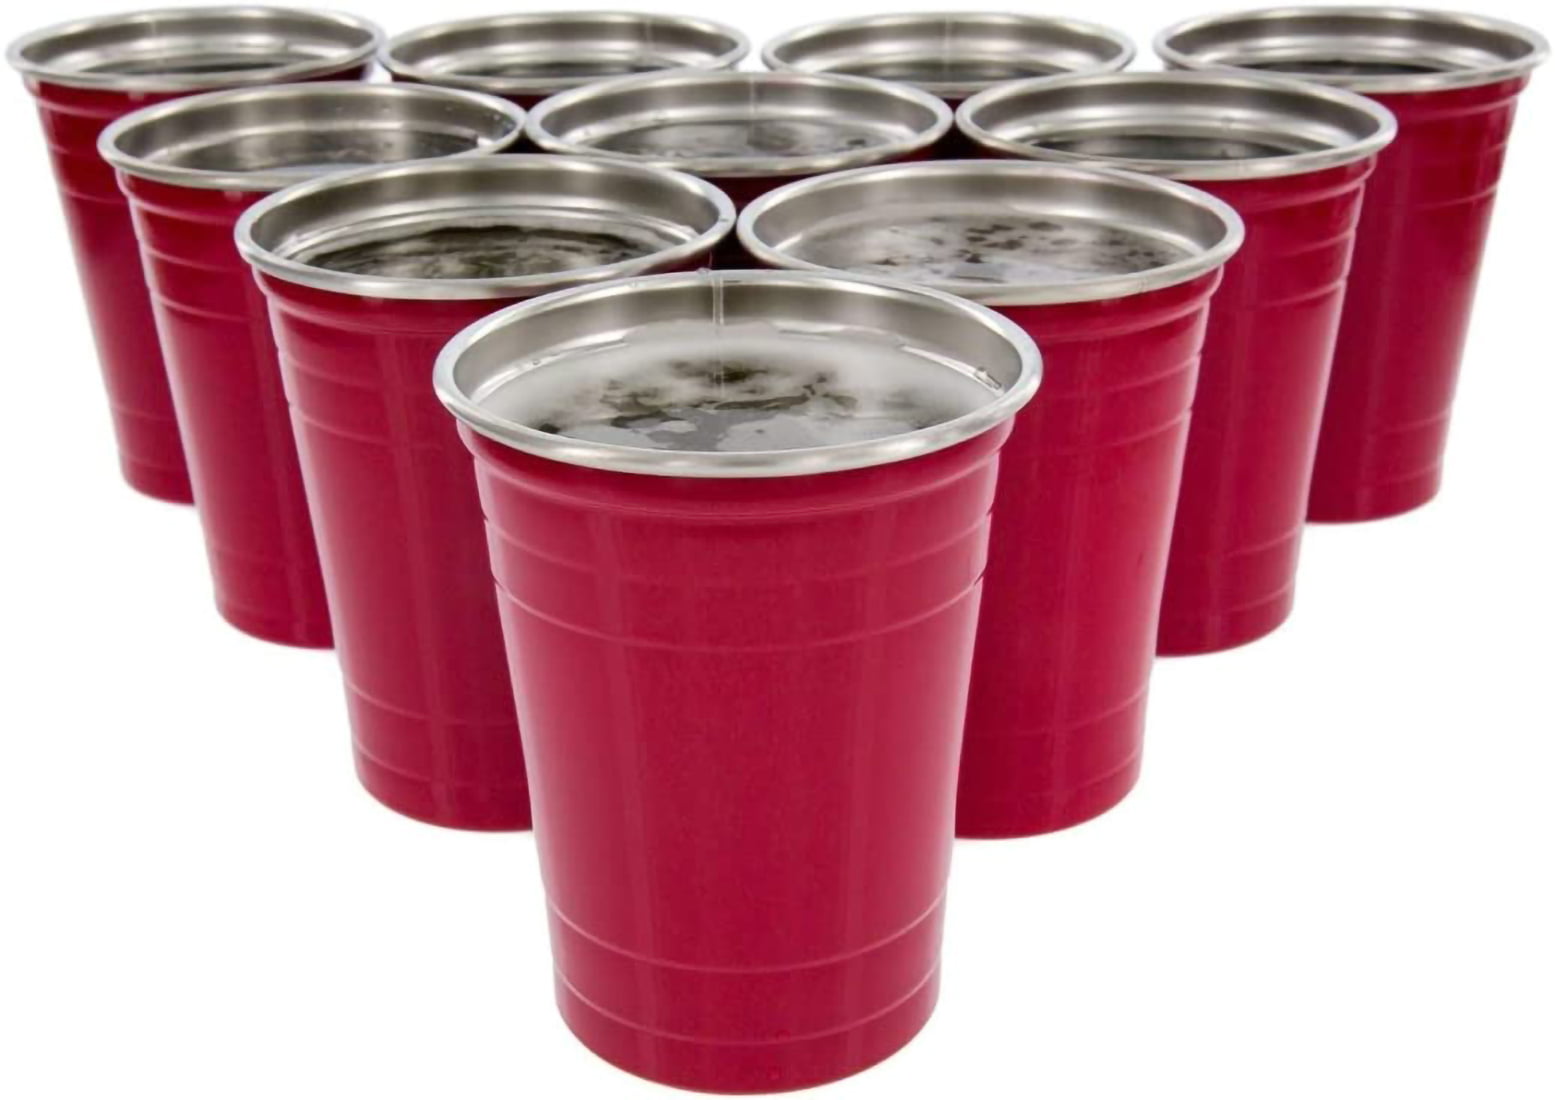 FREE SOLO Metal Cups, Set of 5